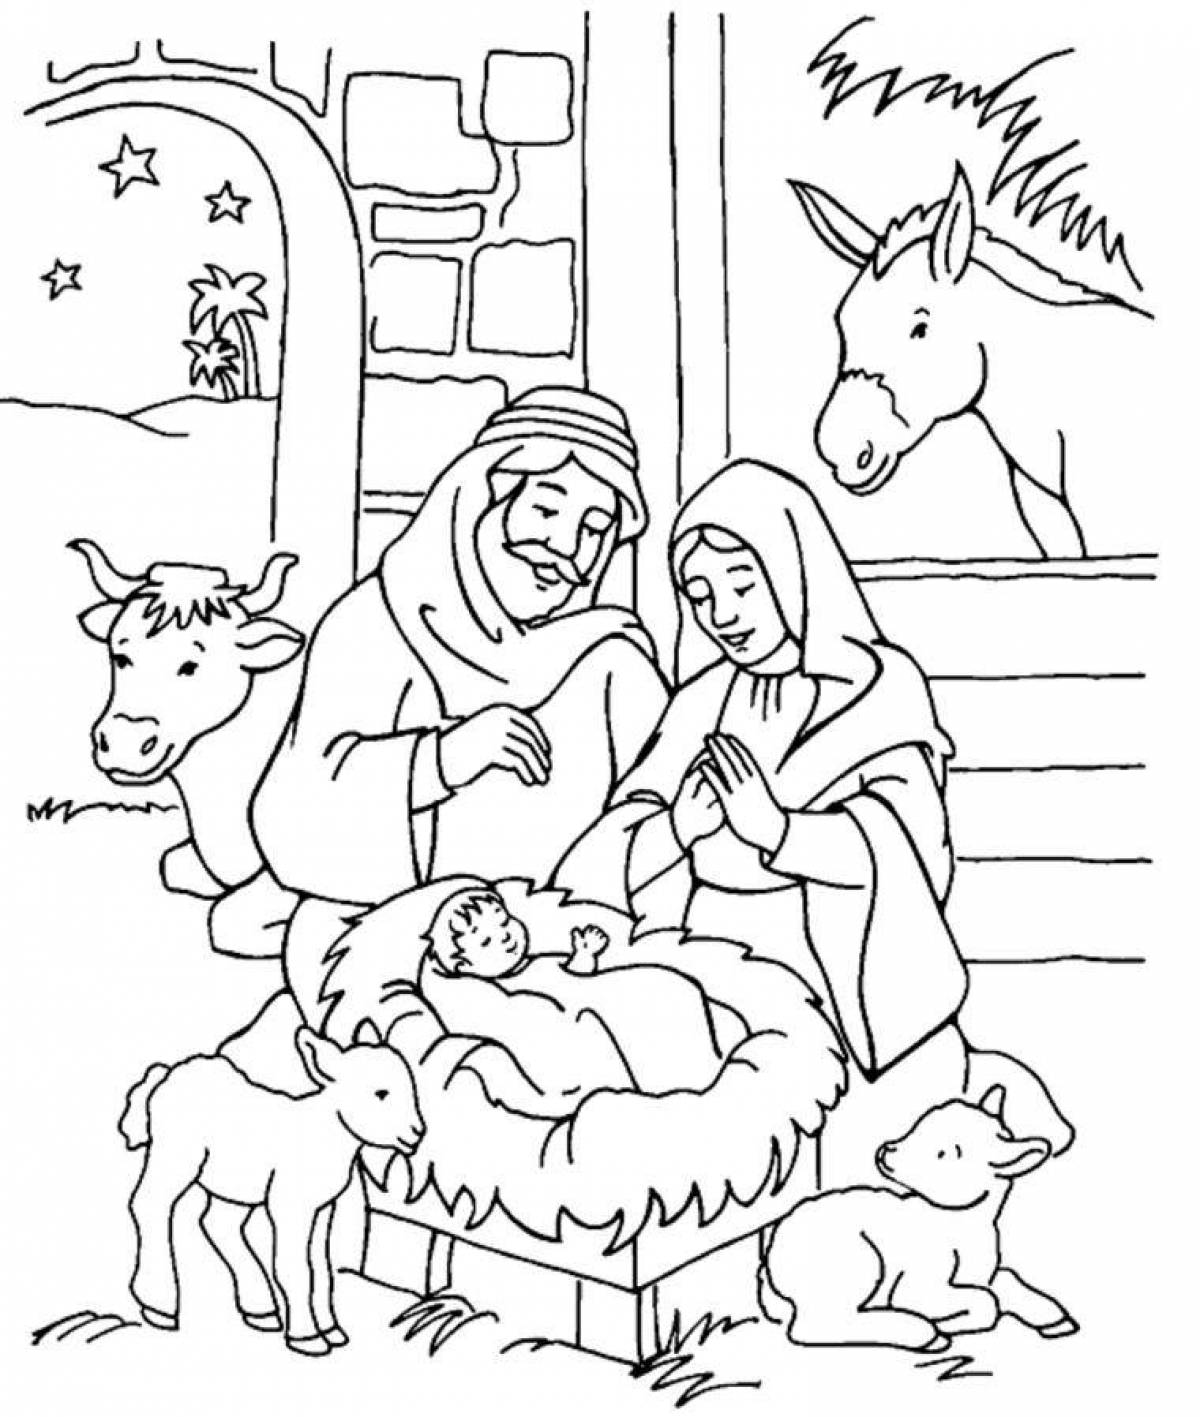 Christmas pictures for kids #3